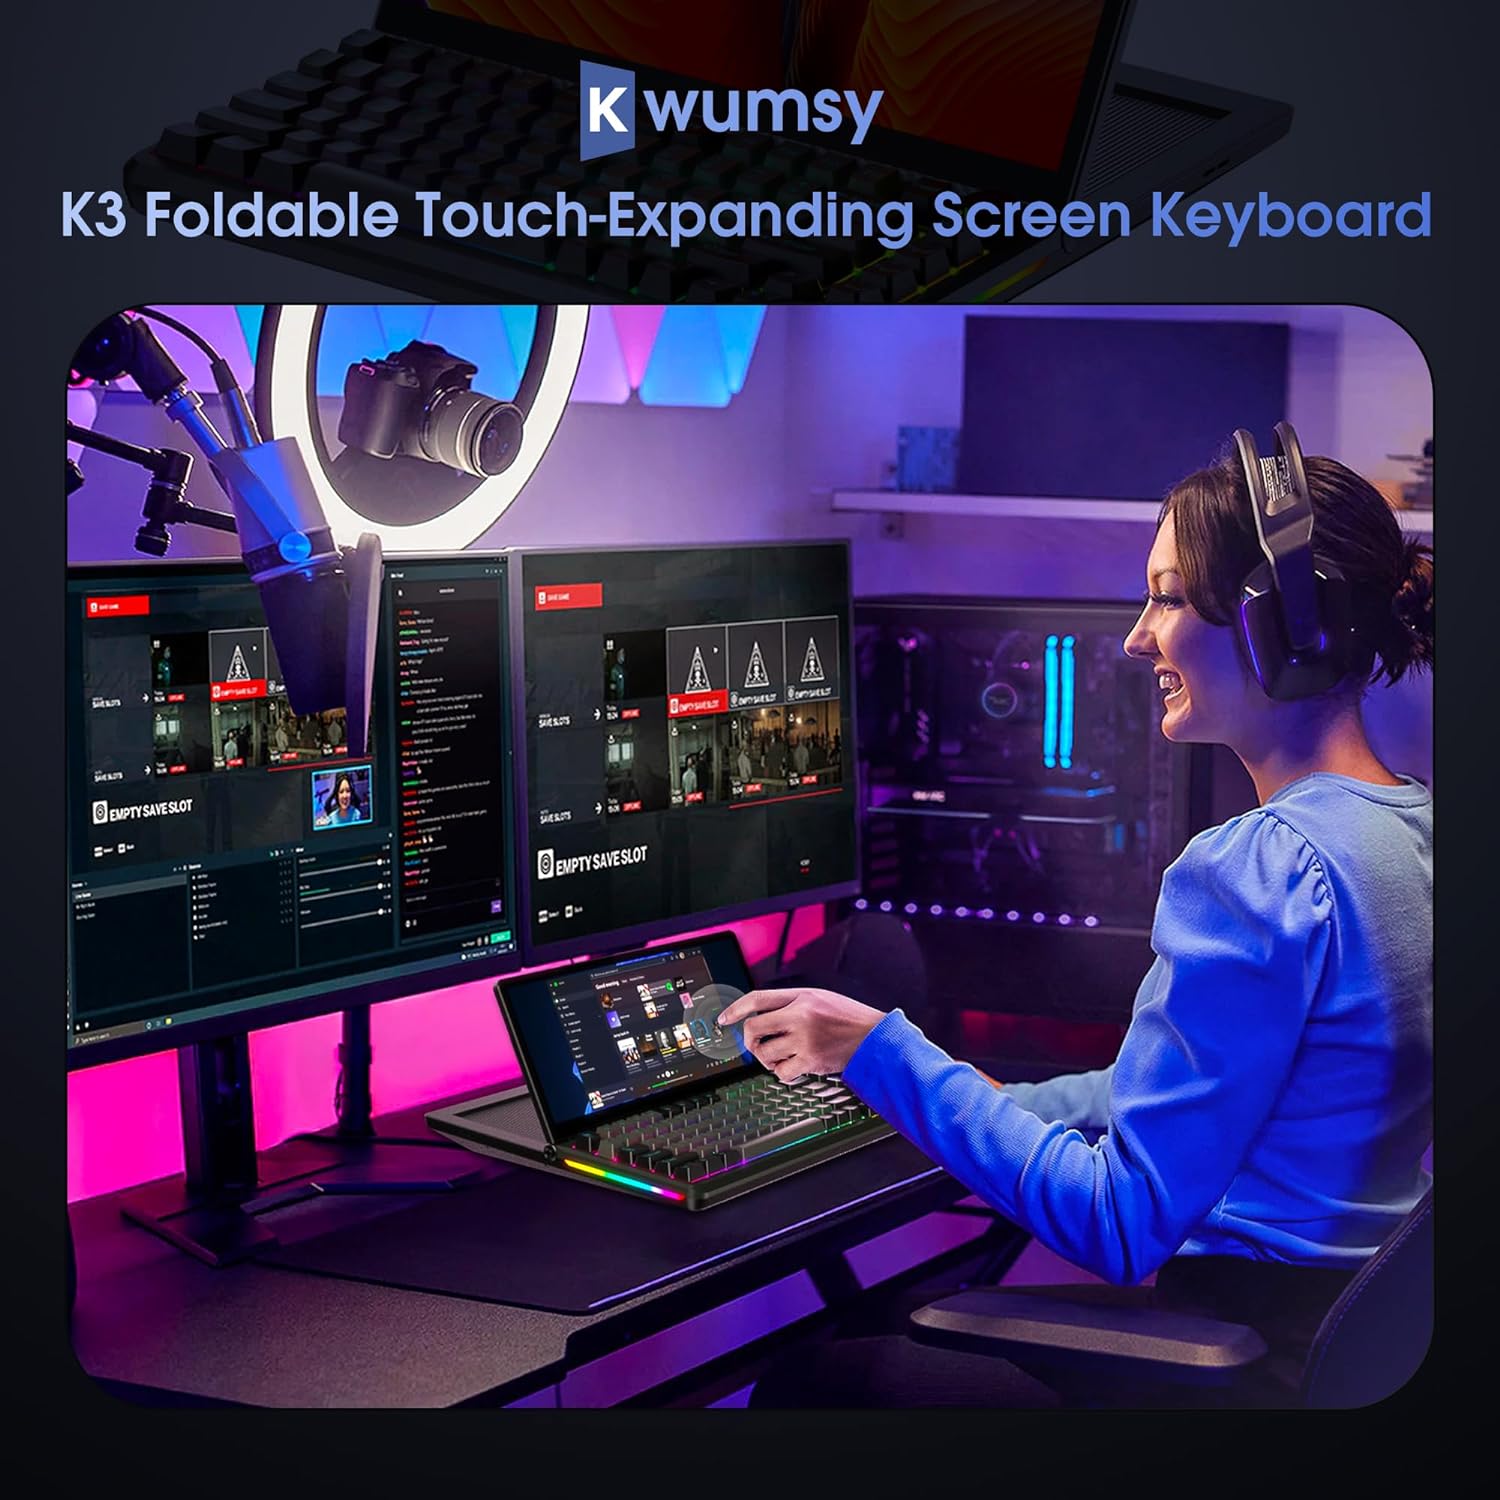 Kwumsy K3 Touch Expanding Screen Keyboard